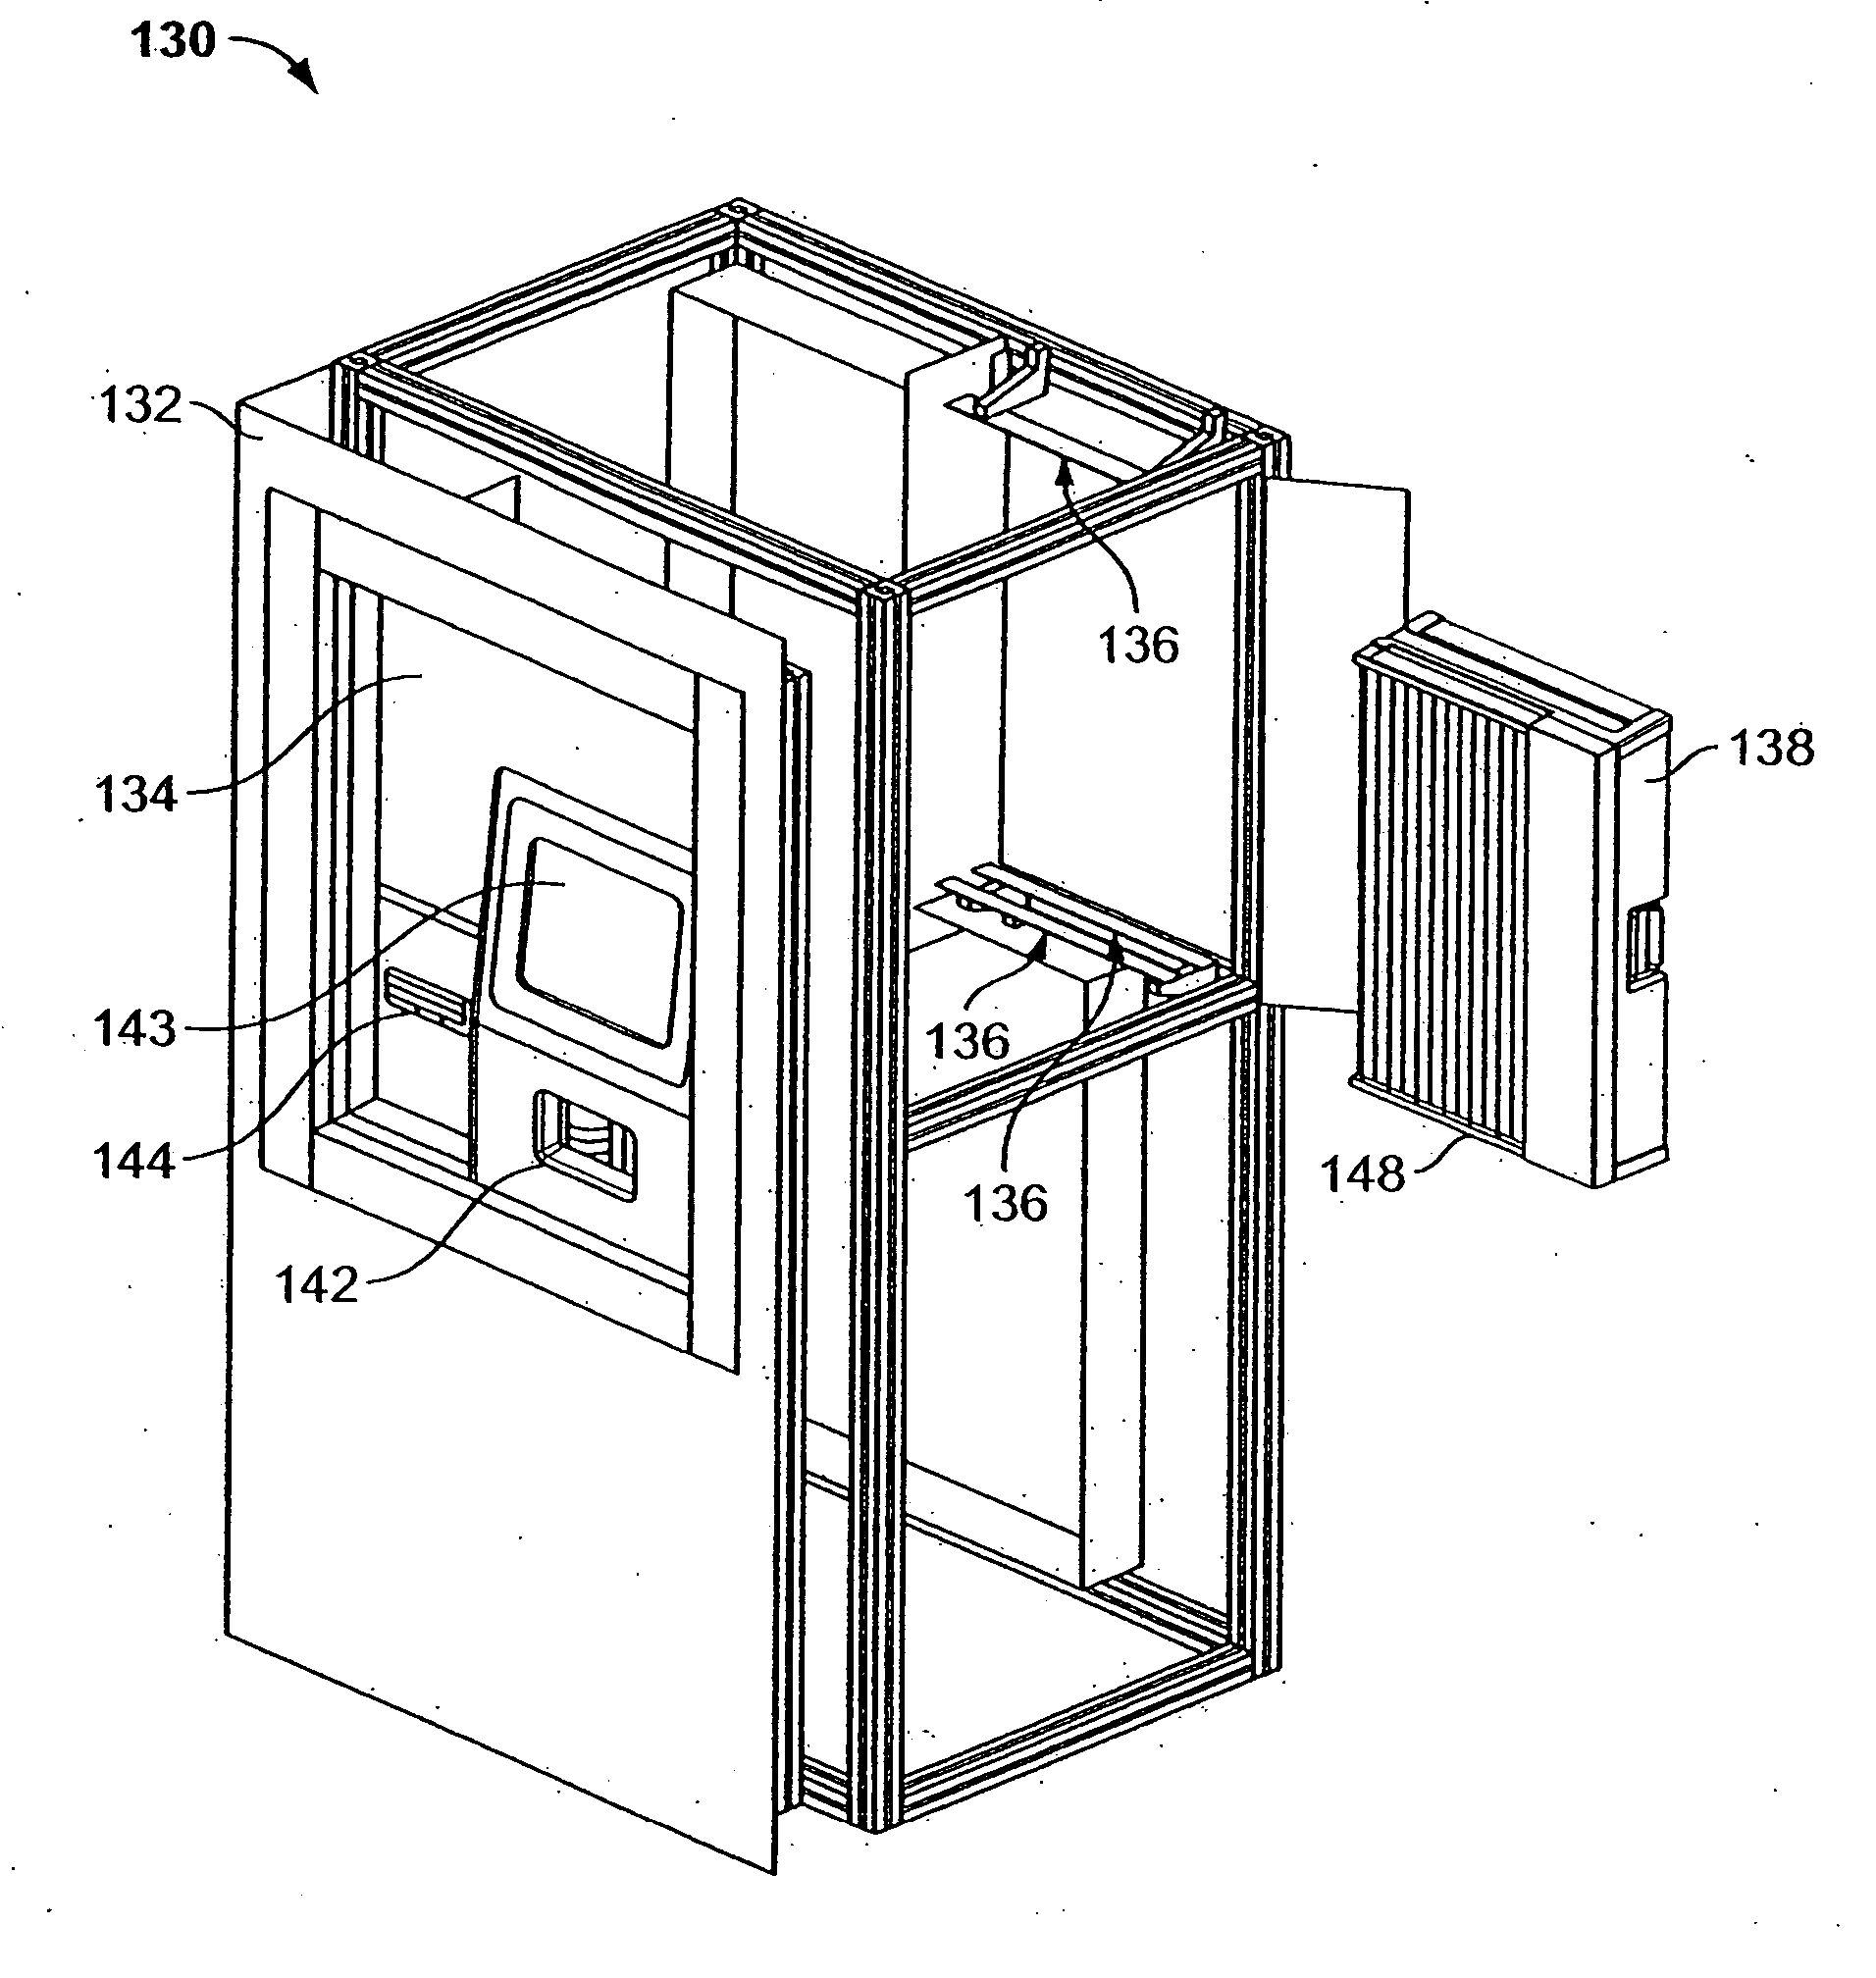 System and method for managing vending inventory